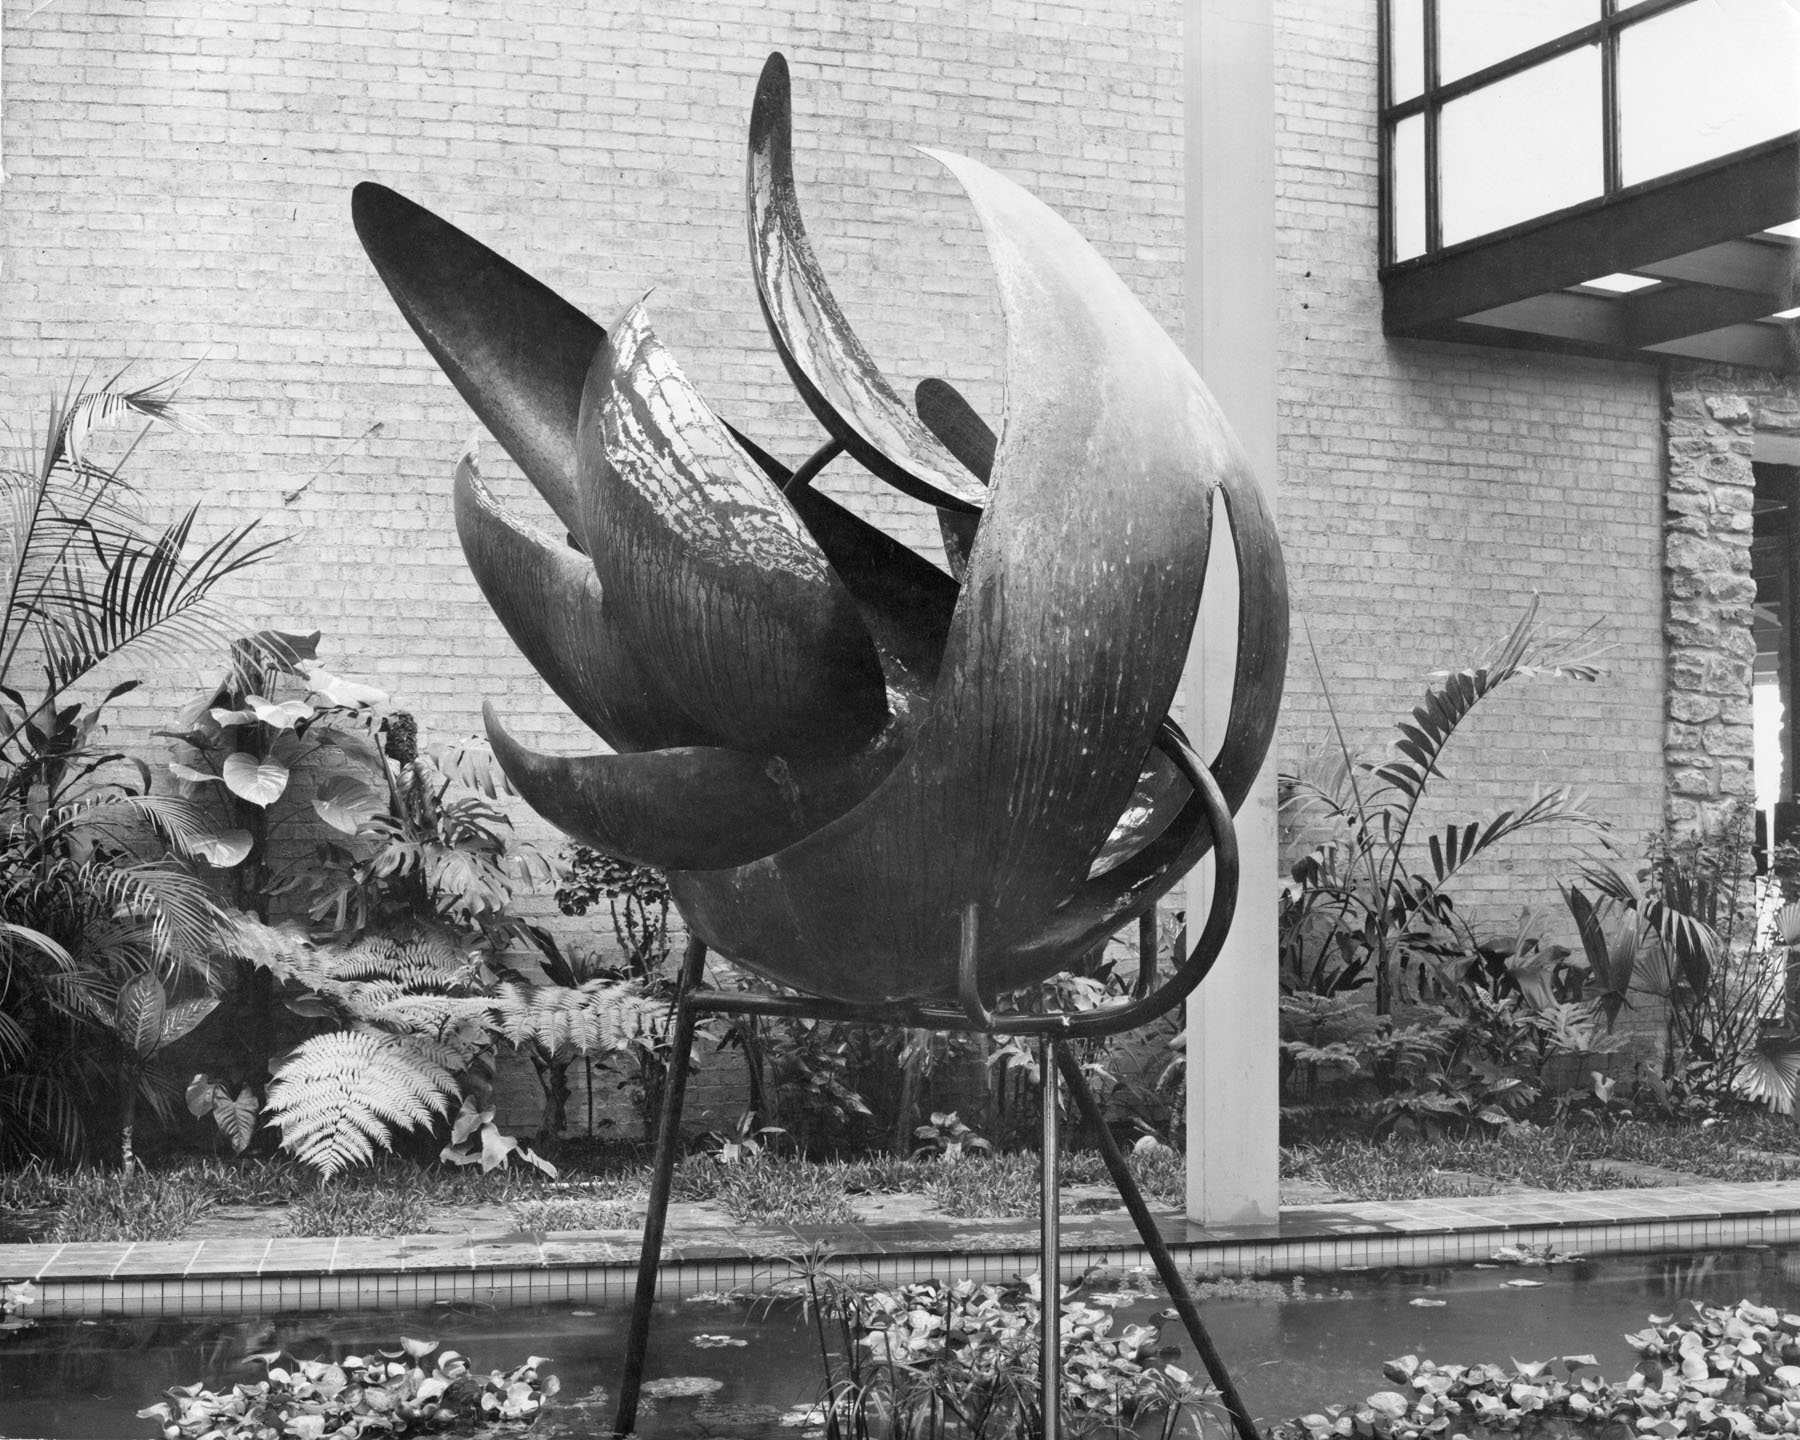 Black-and-white photo of a flower-like sculpture situated within landscaping.